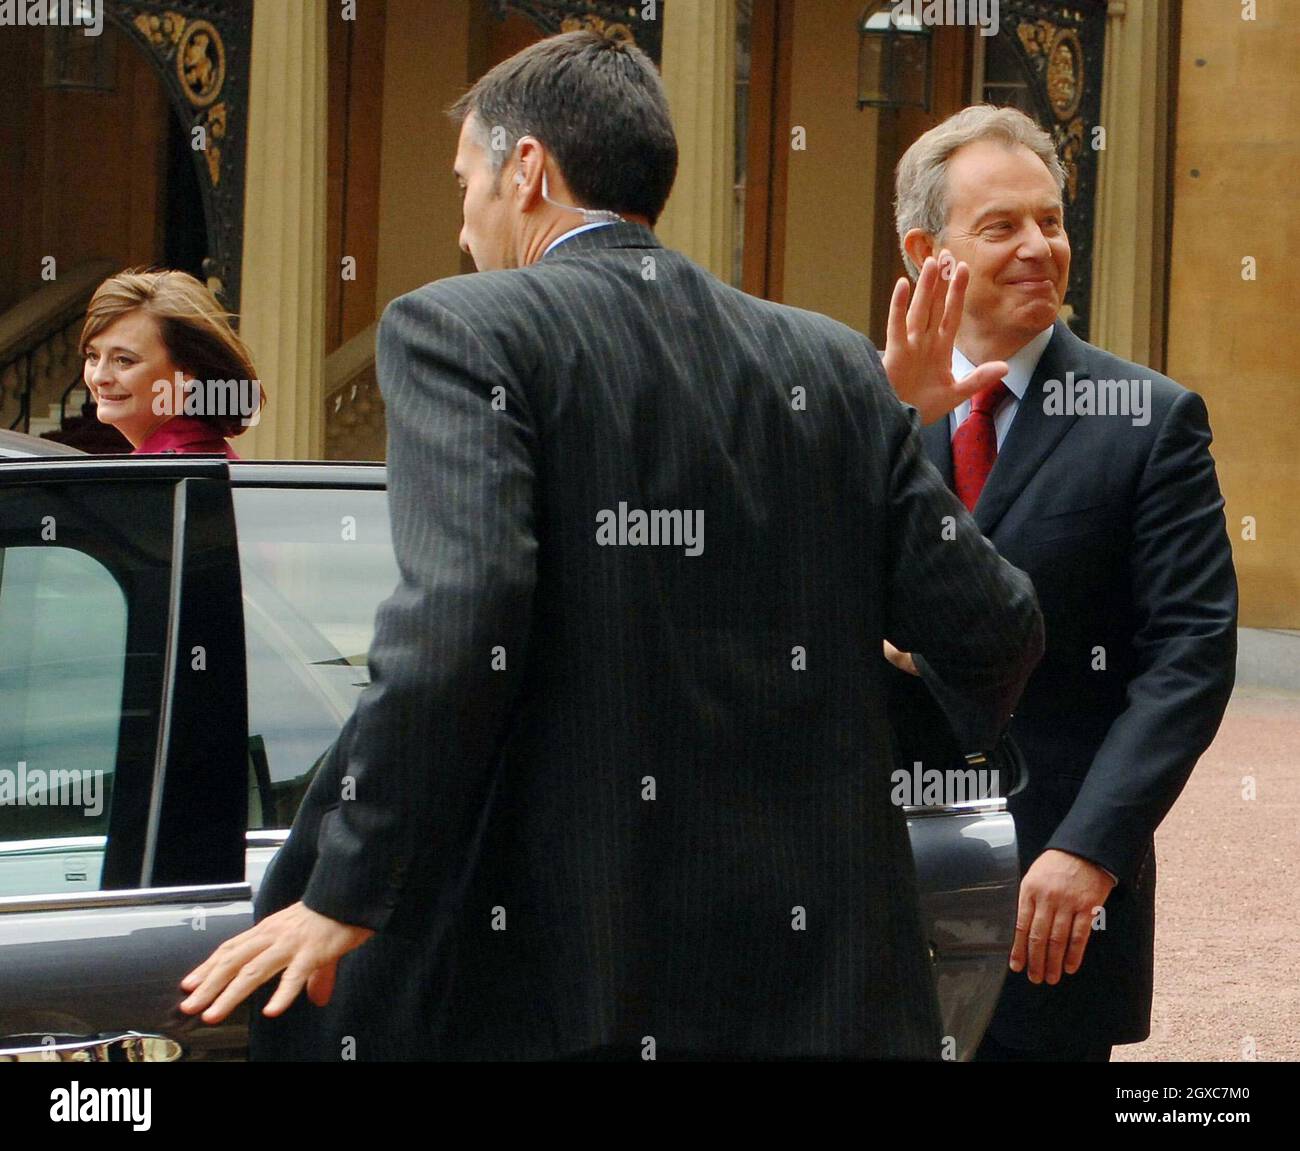 Prime Minister Tony Blair, accompanied by wife Cherie, leaves Buckingham Palace after tendering his resignation to Queen Elizabeth ll on June 27, 2007. Stock Photo